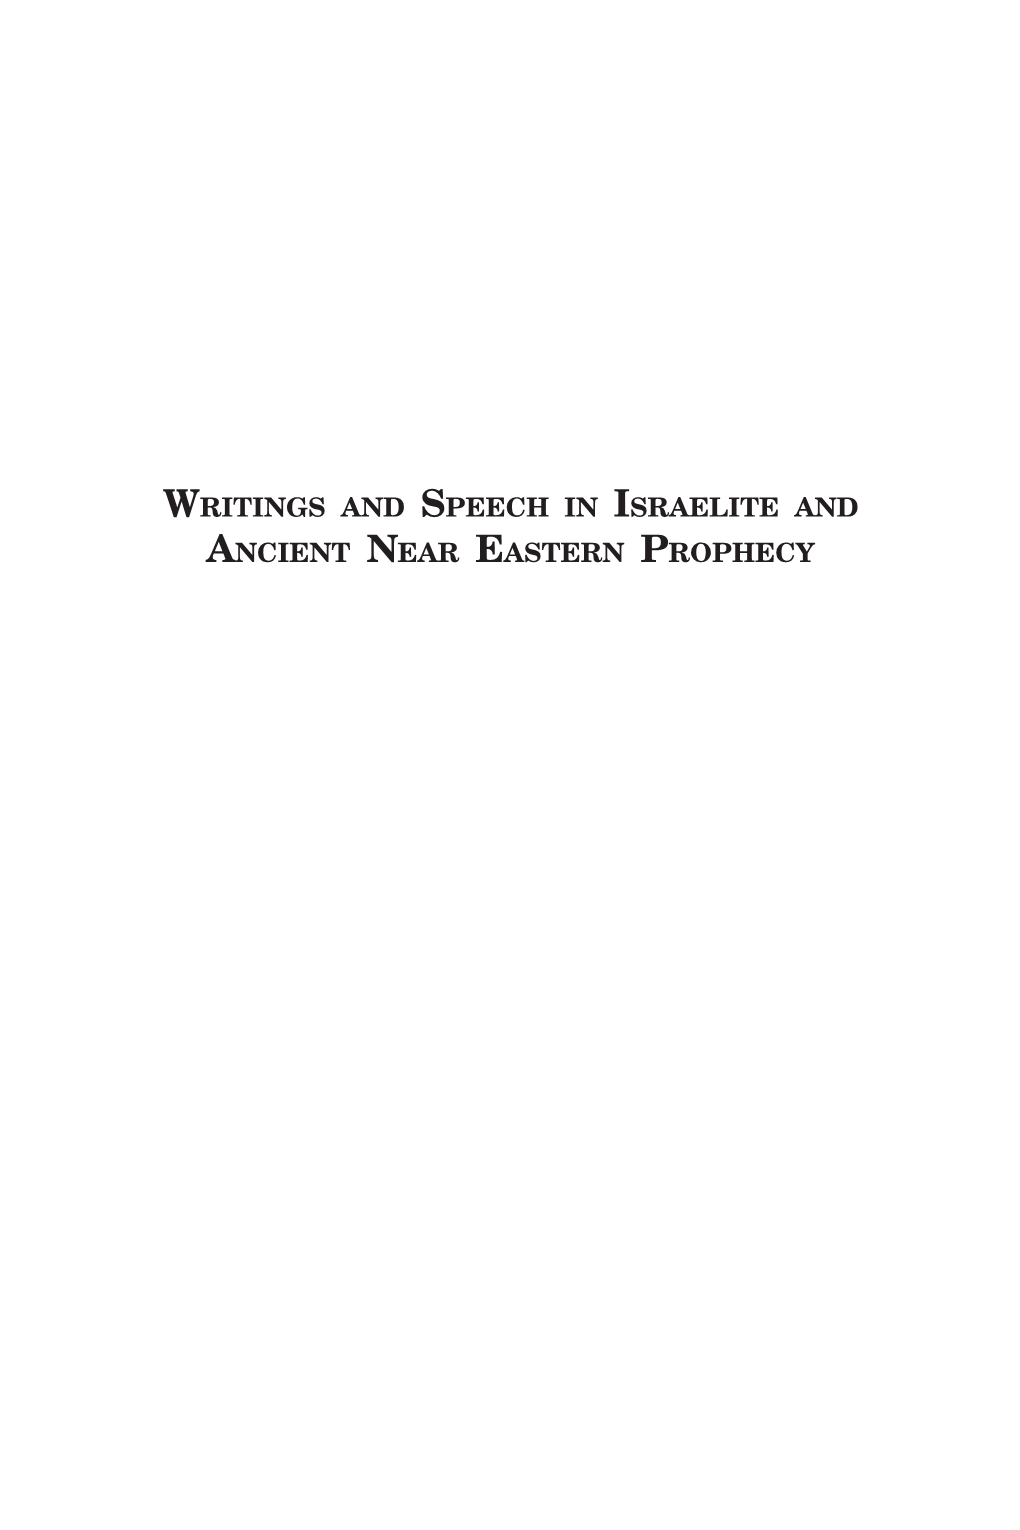 Writings and Speech in Israelite and Ancient Near Eastern Prophecy Society of Biblical Literature